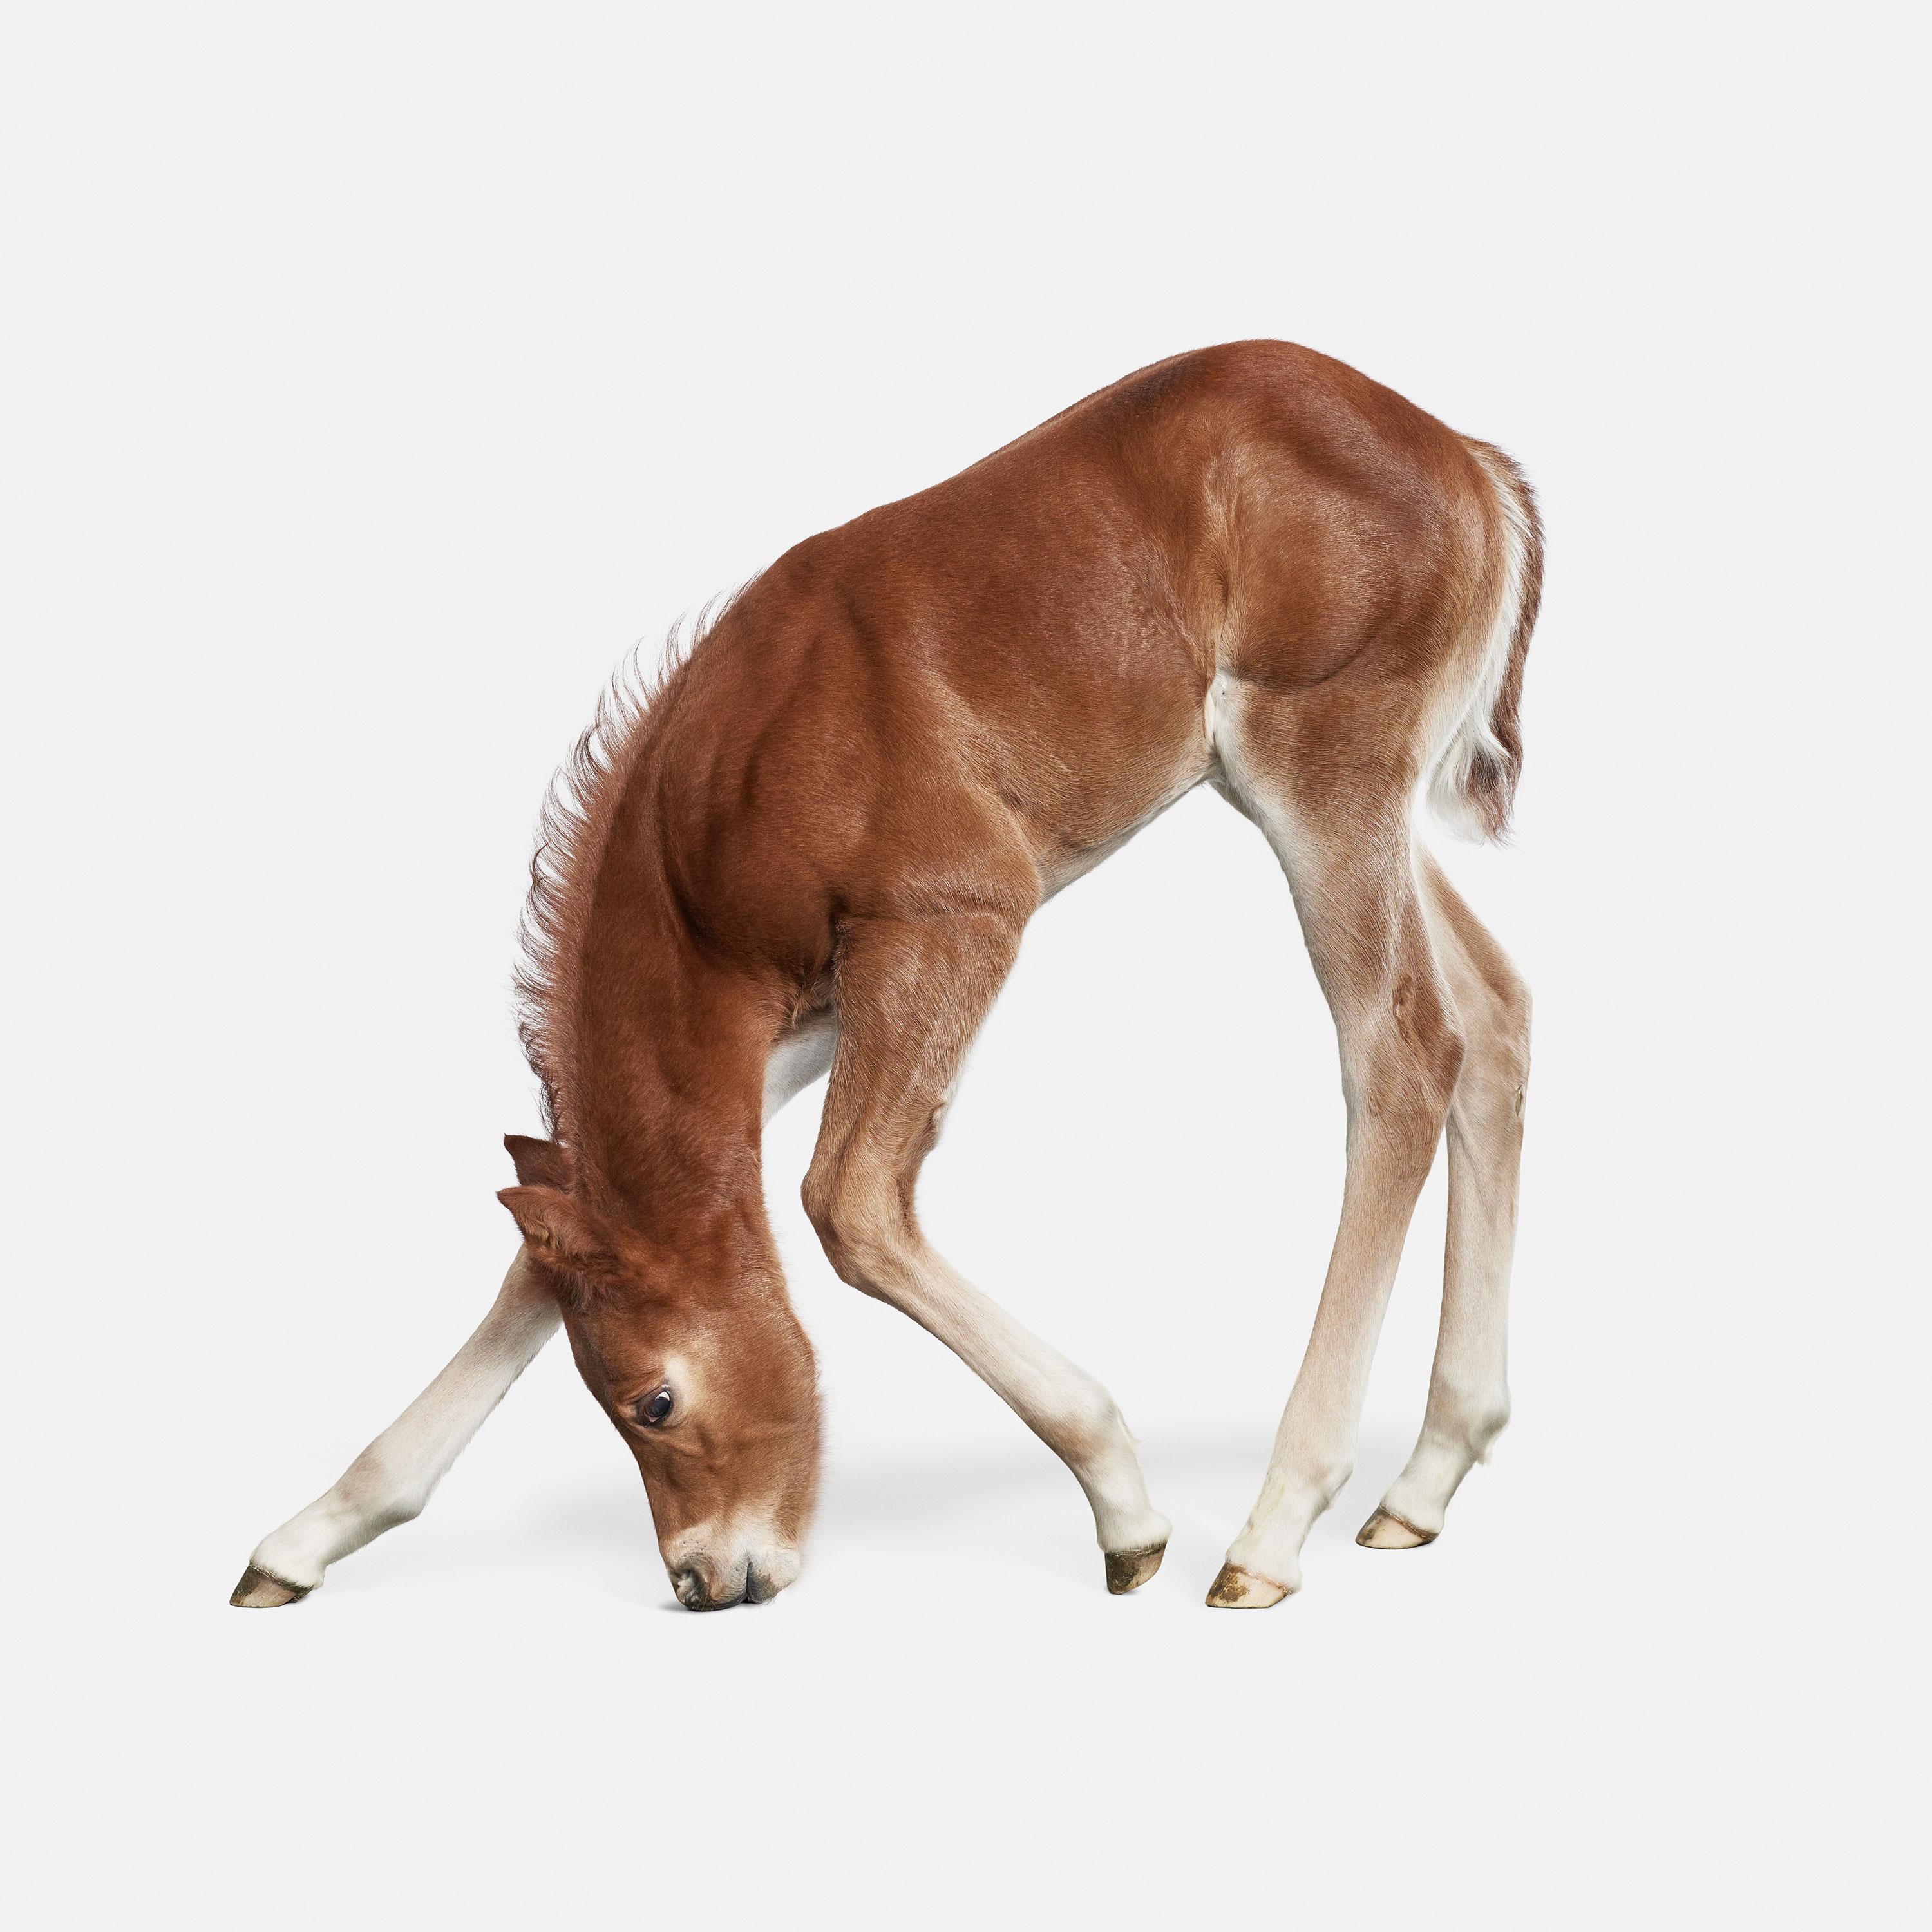 Available Sizes:
32" x 32" Edition of 15
40" x 40" Edition of 10
48" x 48" Edition of 5

Weston: There are few things more adorable than a baby horse.  28-day-old Weston and his ridiculously cute gallop would make even the manliest of men soften and